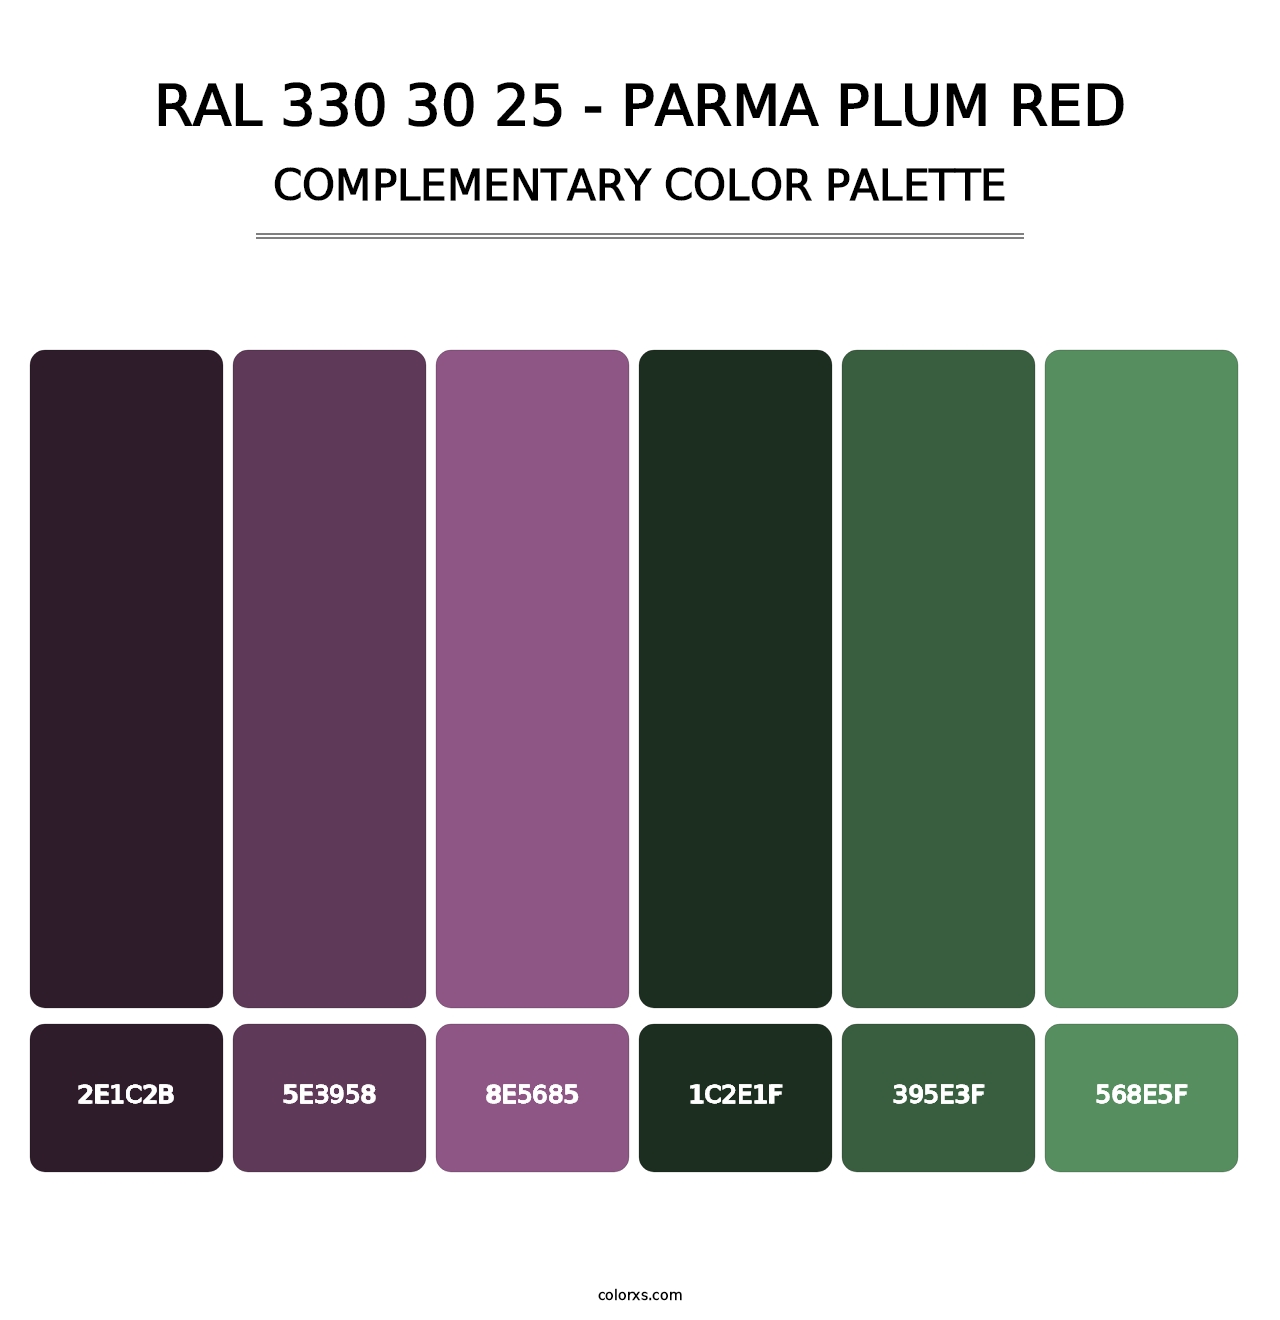 RAL 330 30 25 - Parma Plum Red - Complementary Color Palette